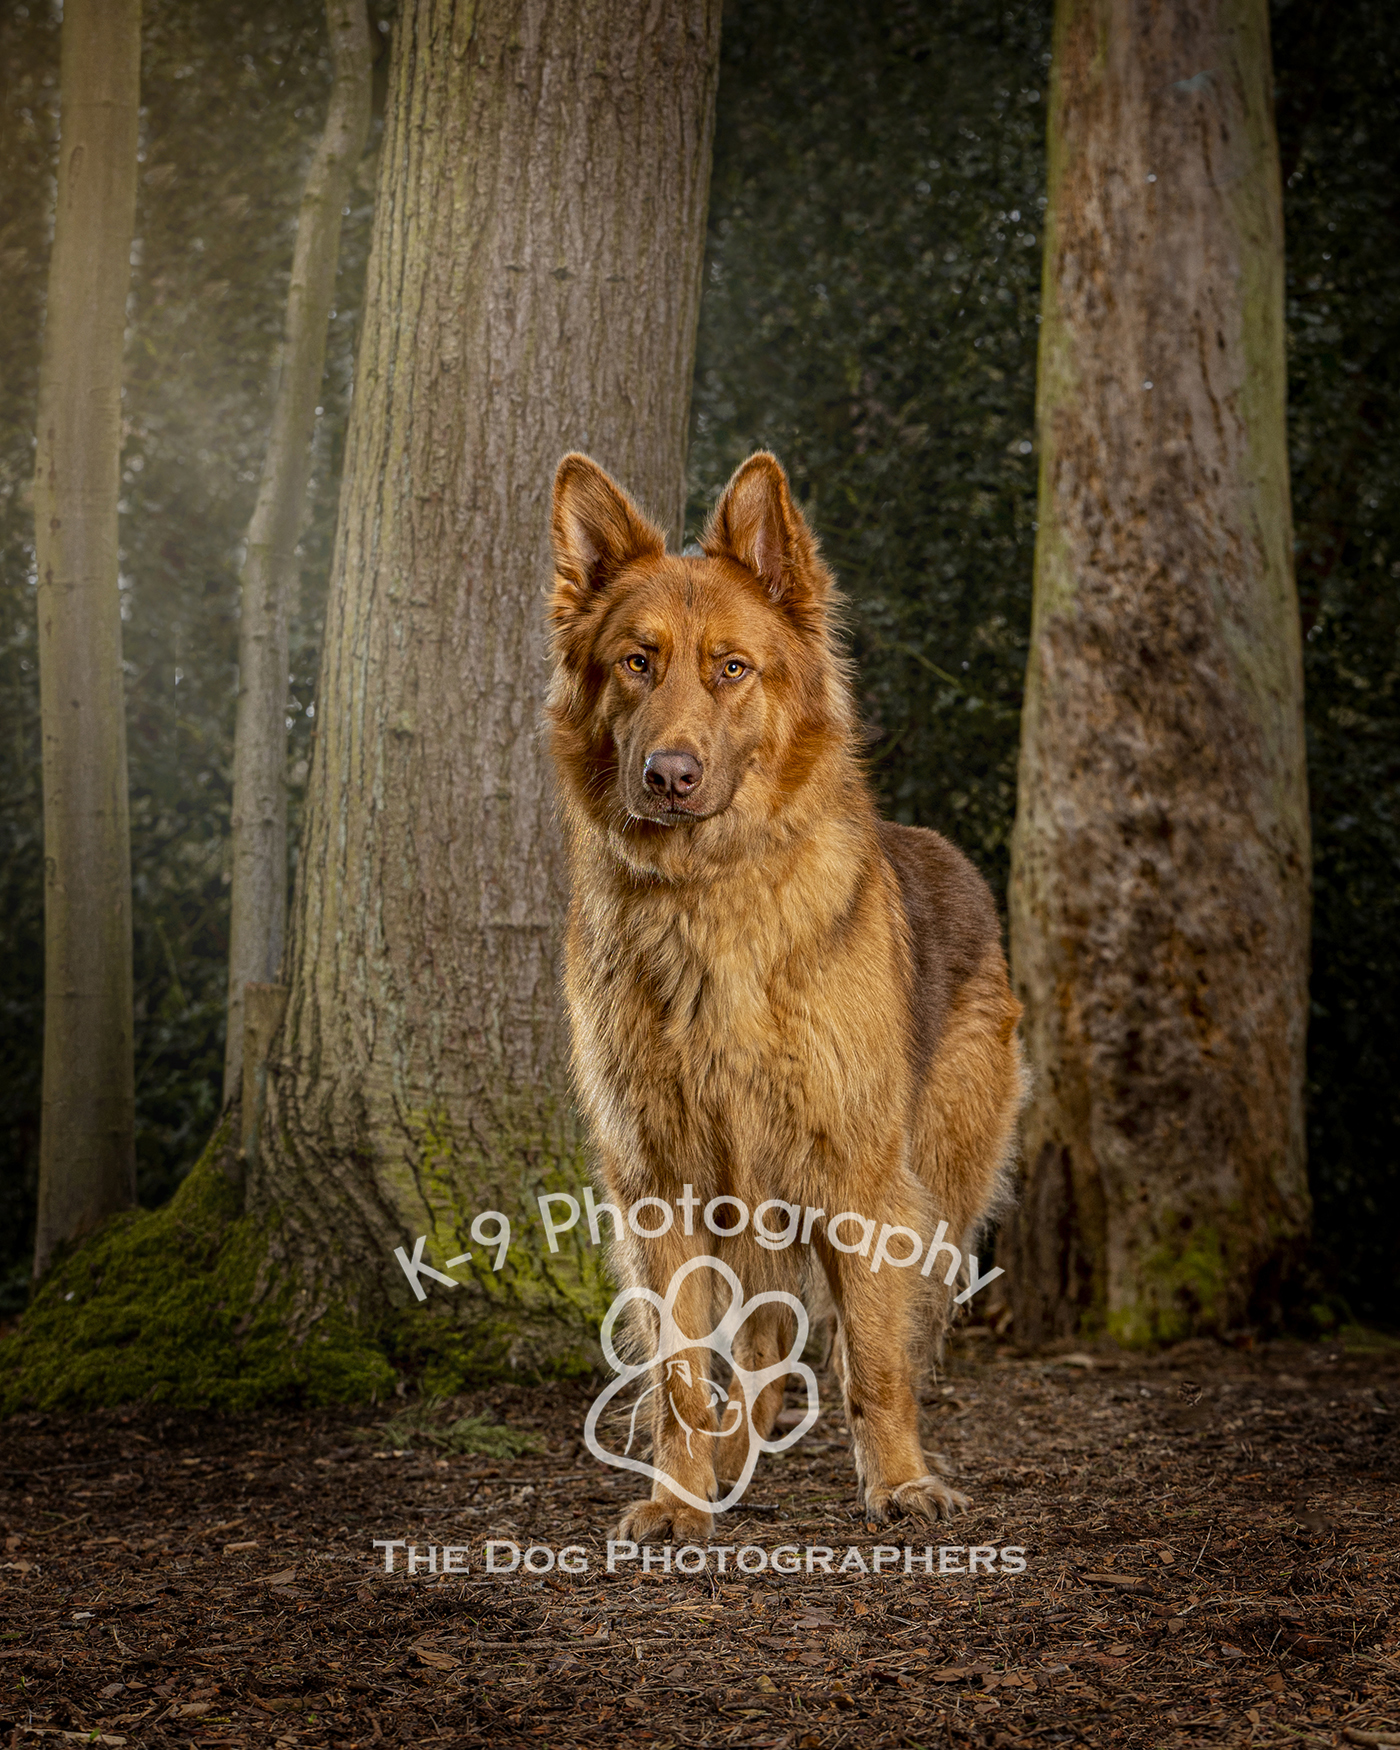 Multi Award-winning dog photography in London, Watford and Barnet - producing fine art dog portraits for clients across the UK